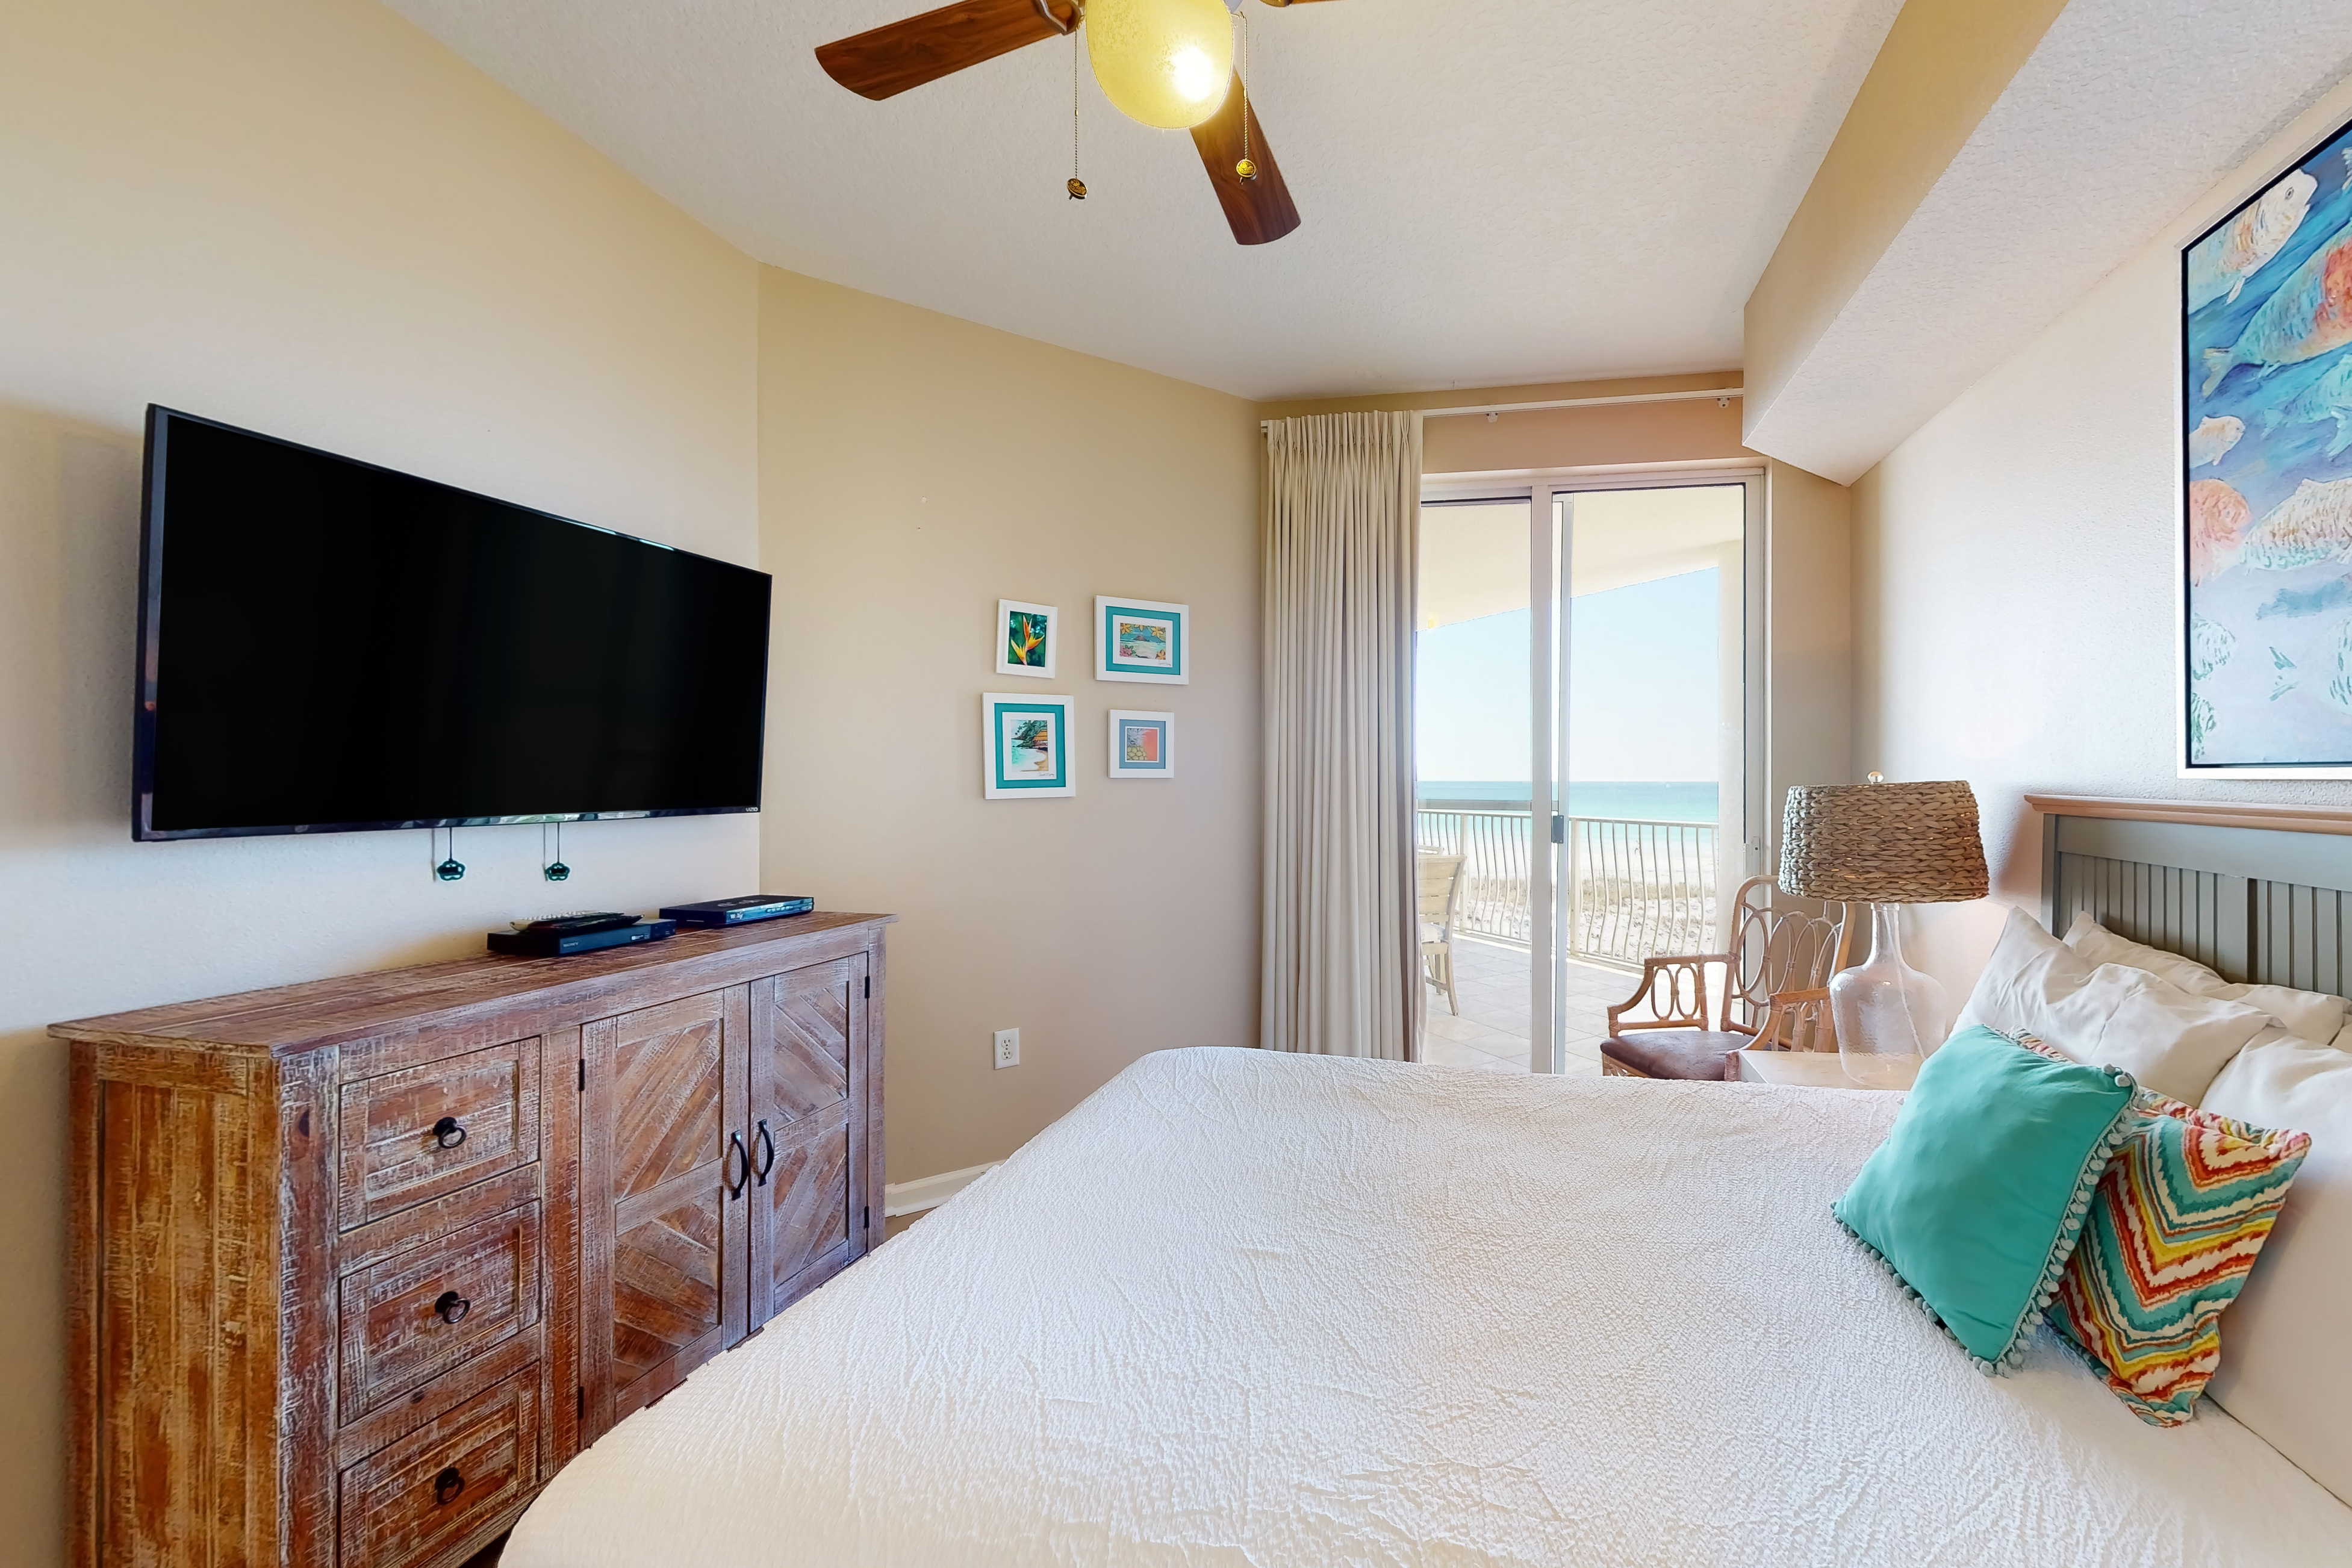 Dunes of Seagrove A209 Condo rental in Dunes of Seagrove in Highway 30-A Florida - #17